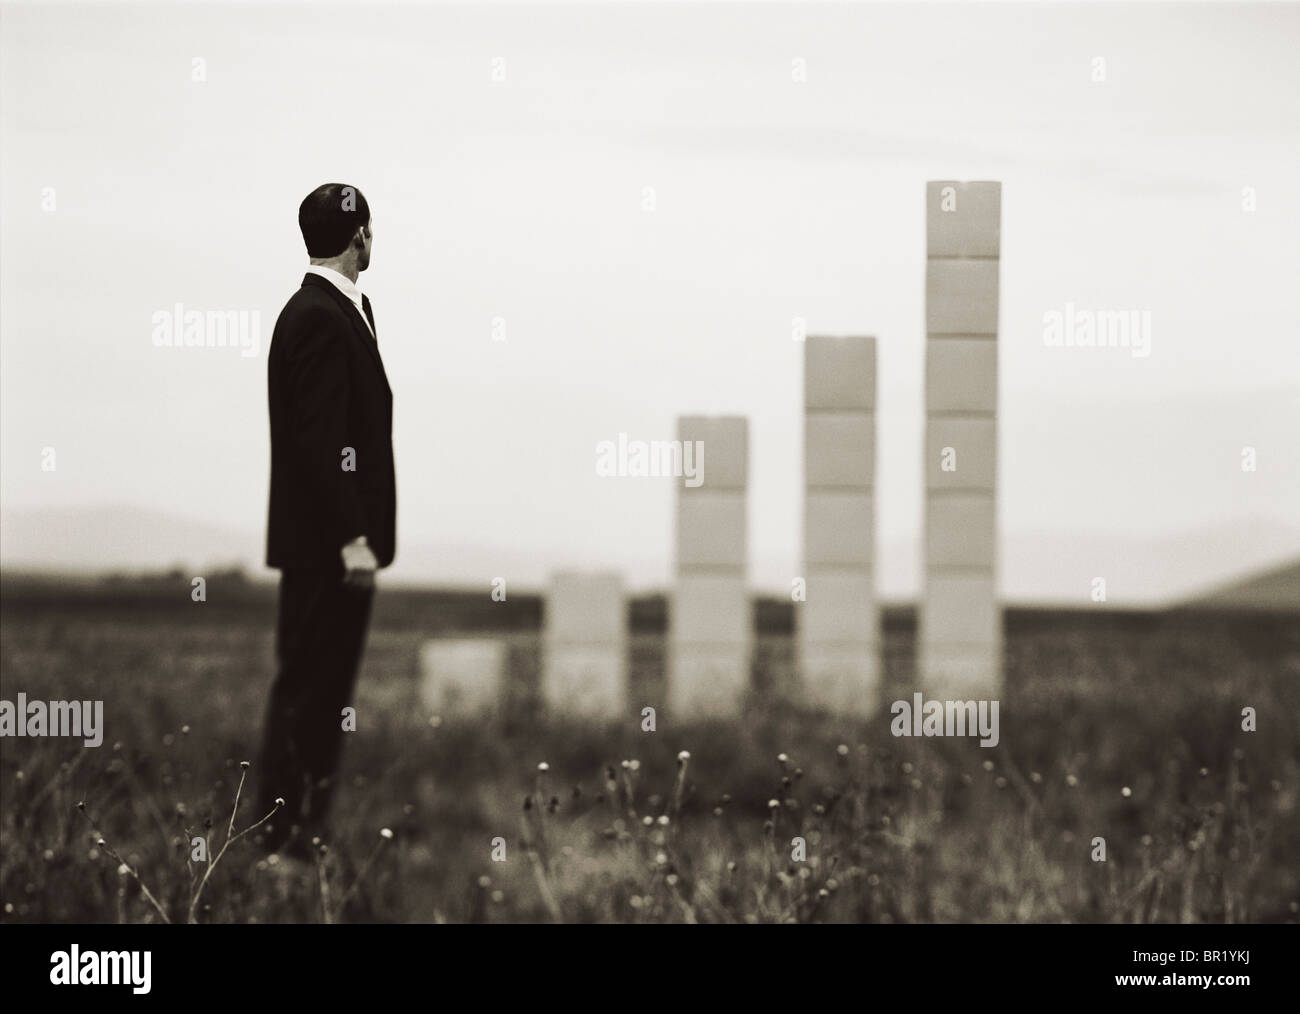 Man out on field with stacked up boxes forming a graph. Stock Photo